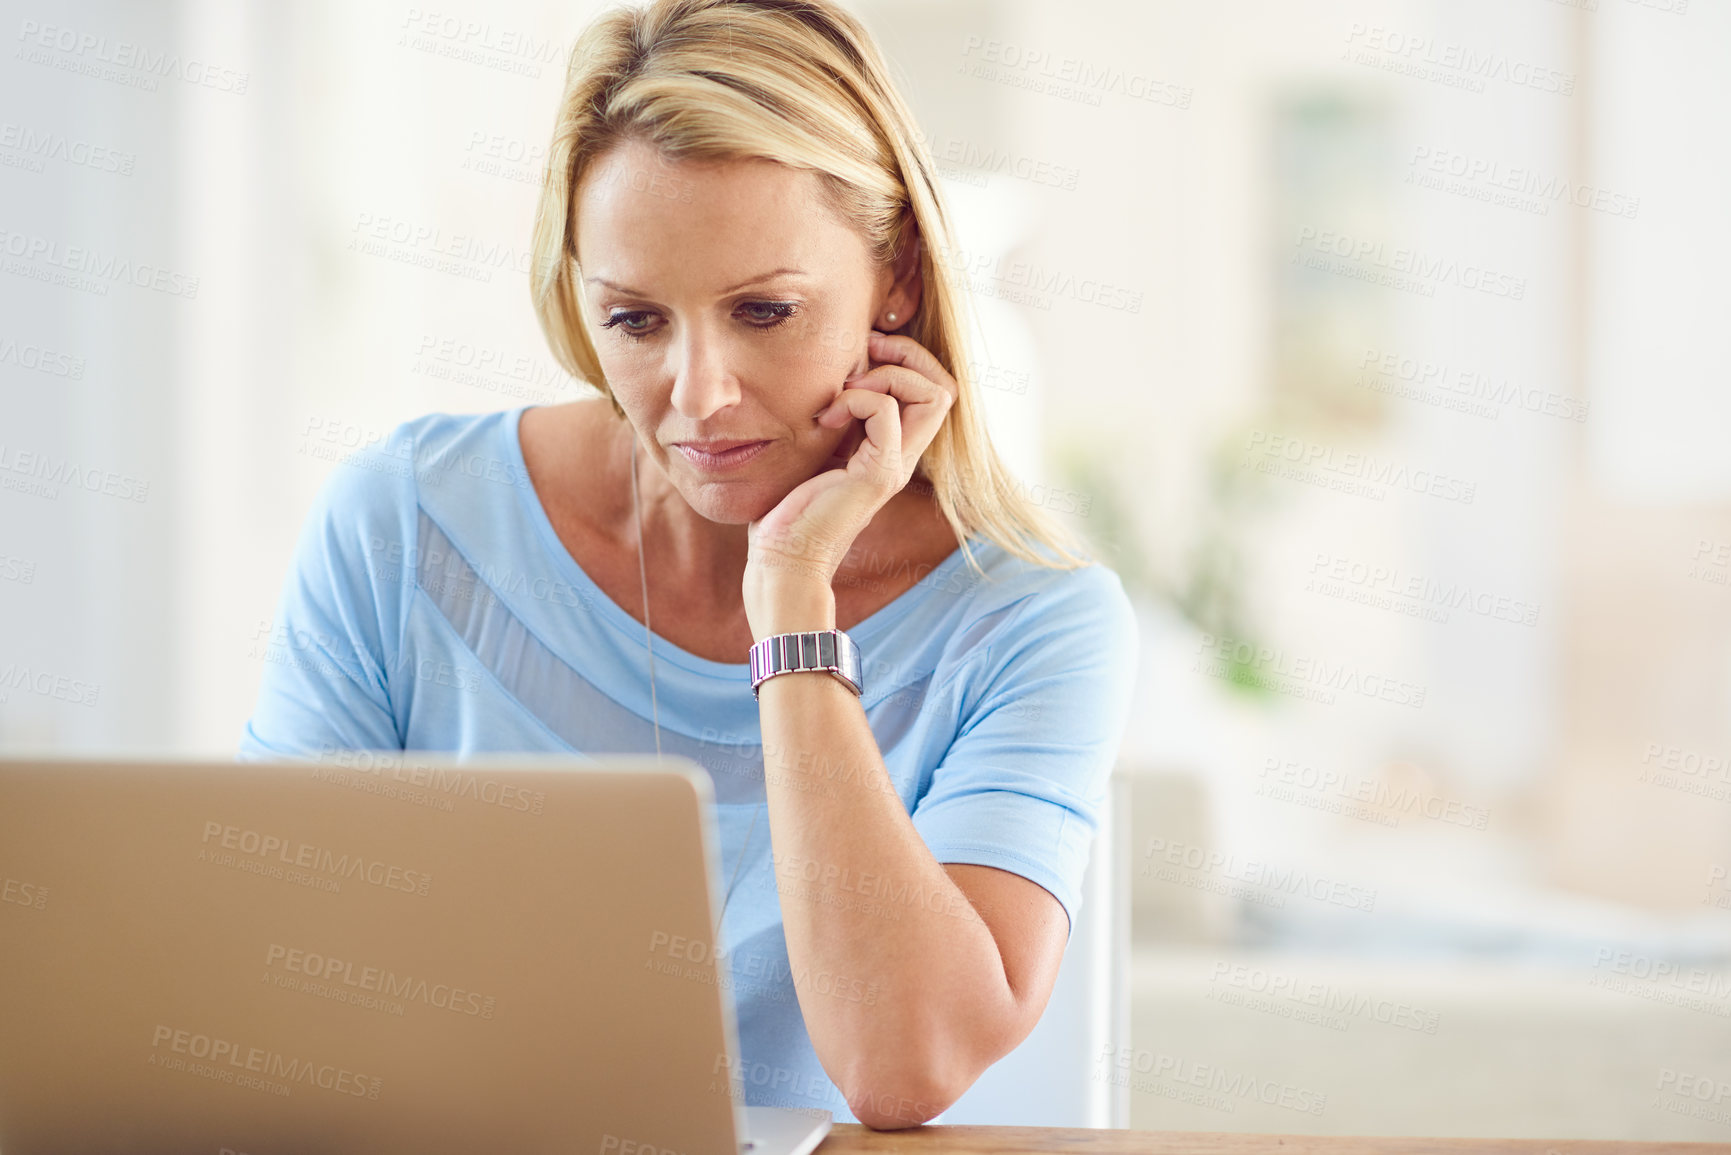 Buy stock photo Cropped shot of an attractive mature woman sitting and using a laptop while in her living room during the day